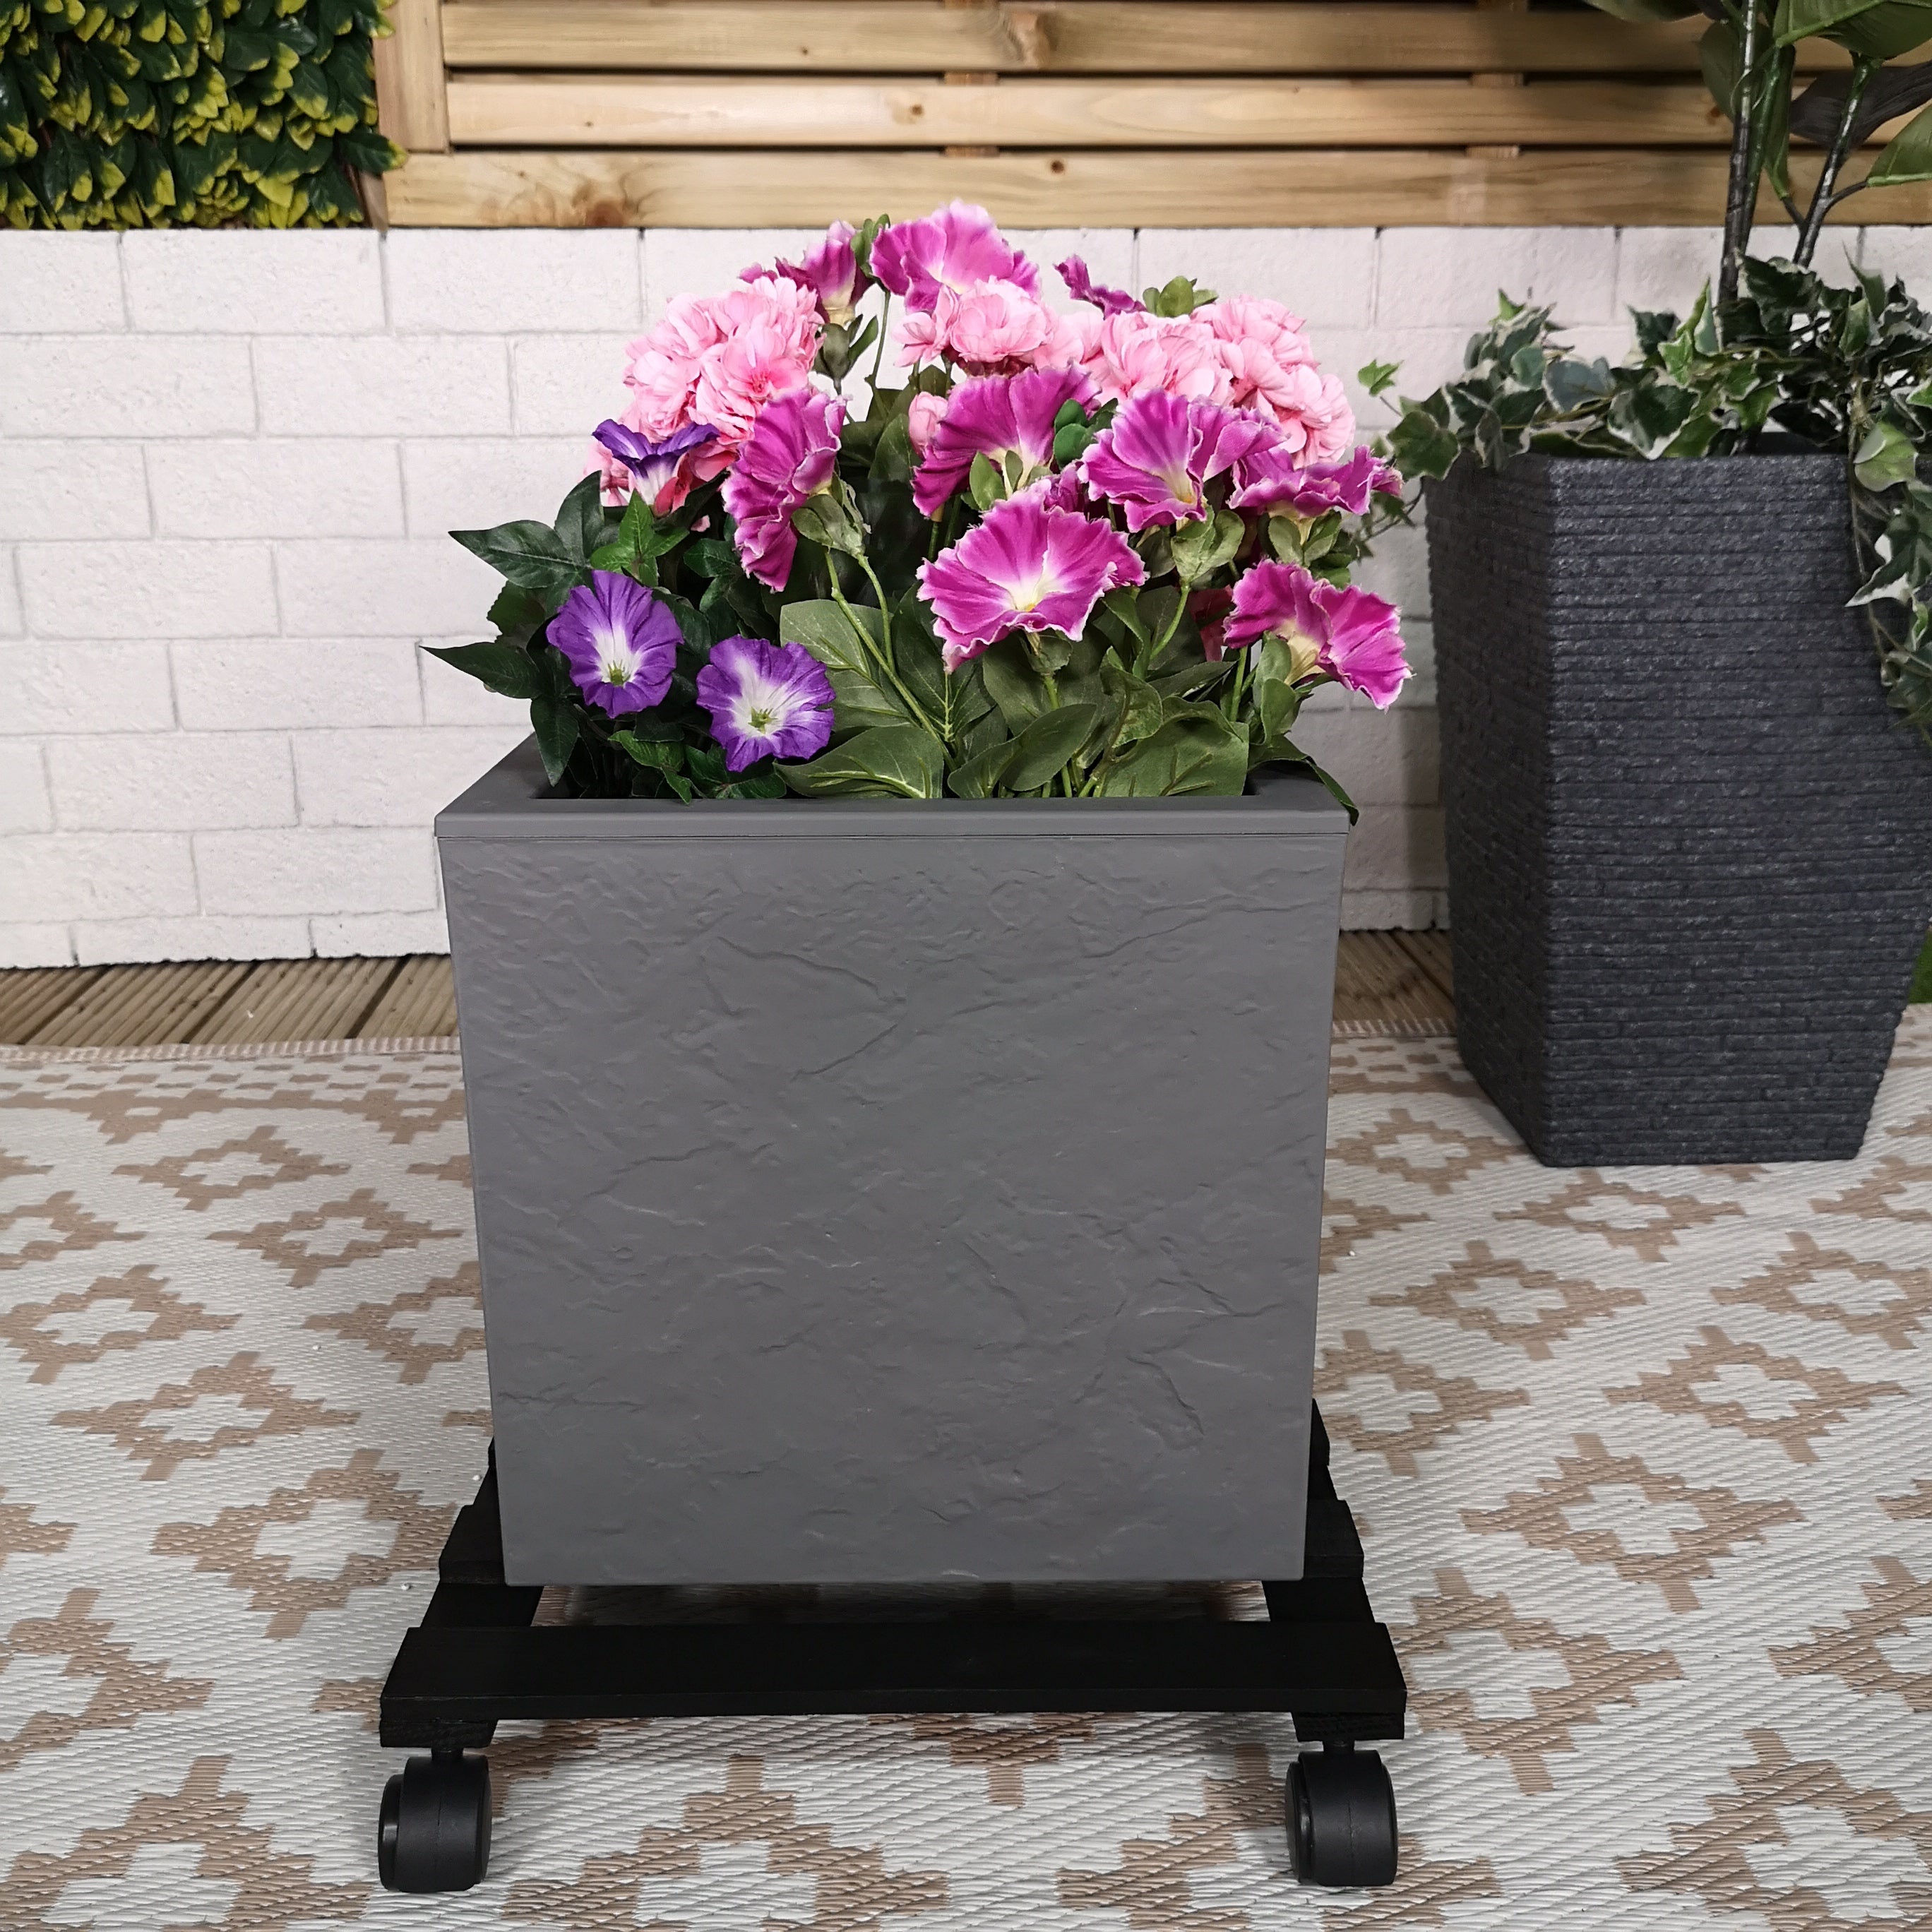 Pack of 2 35cm Black Square Wooden Garden Plant Pot Flower Trolley Stand On Wheels